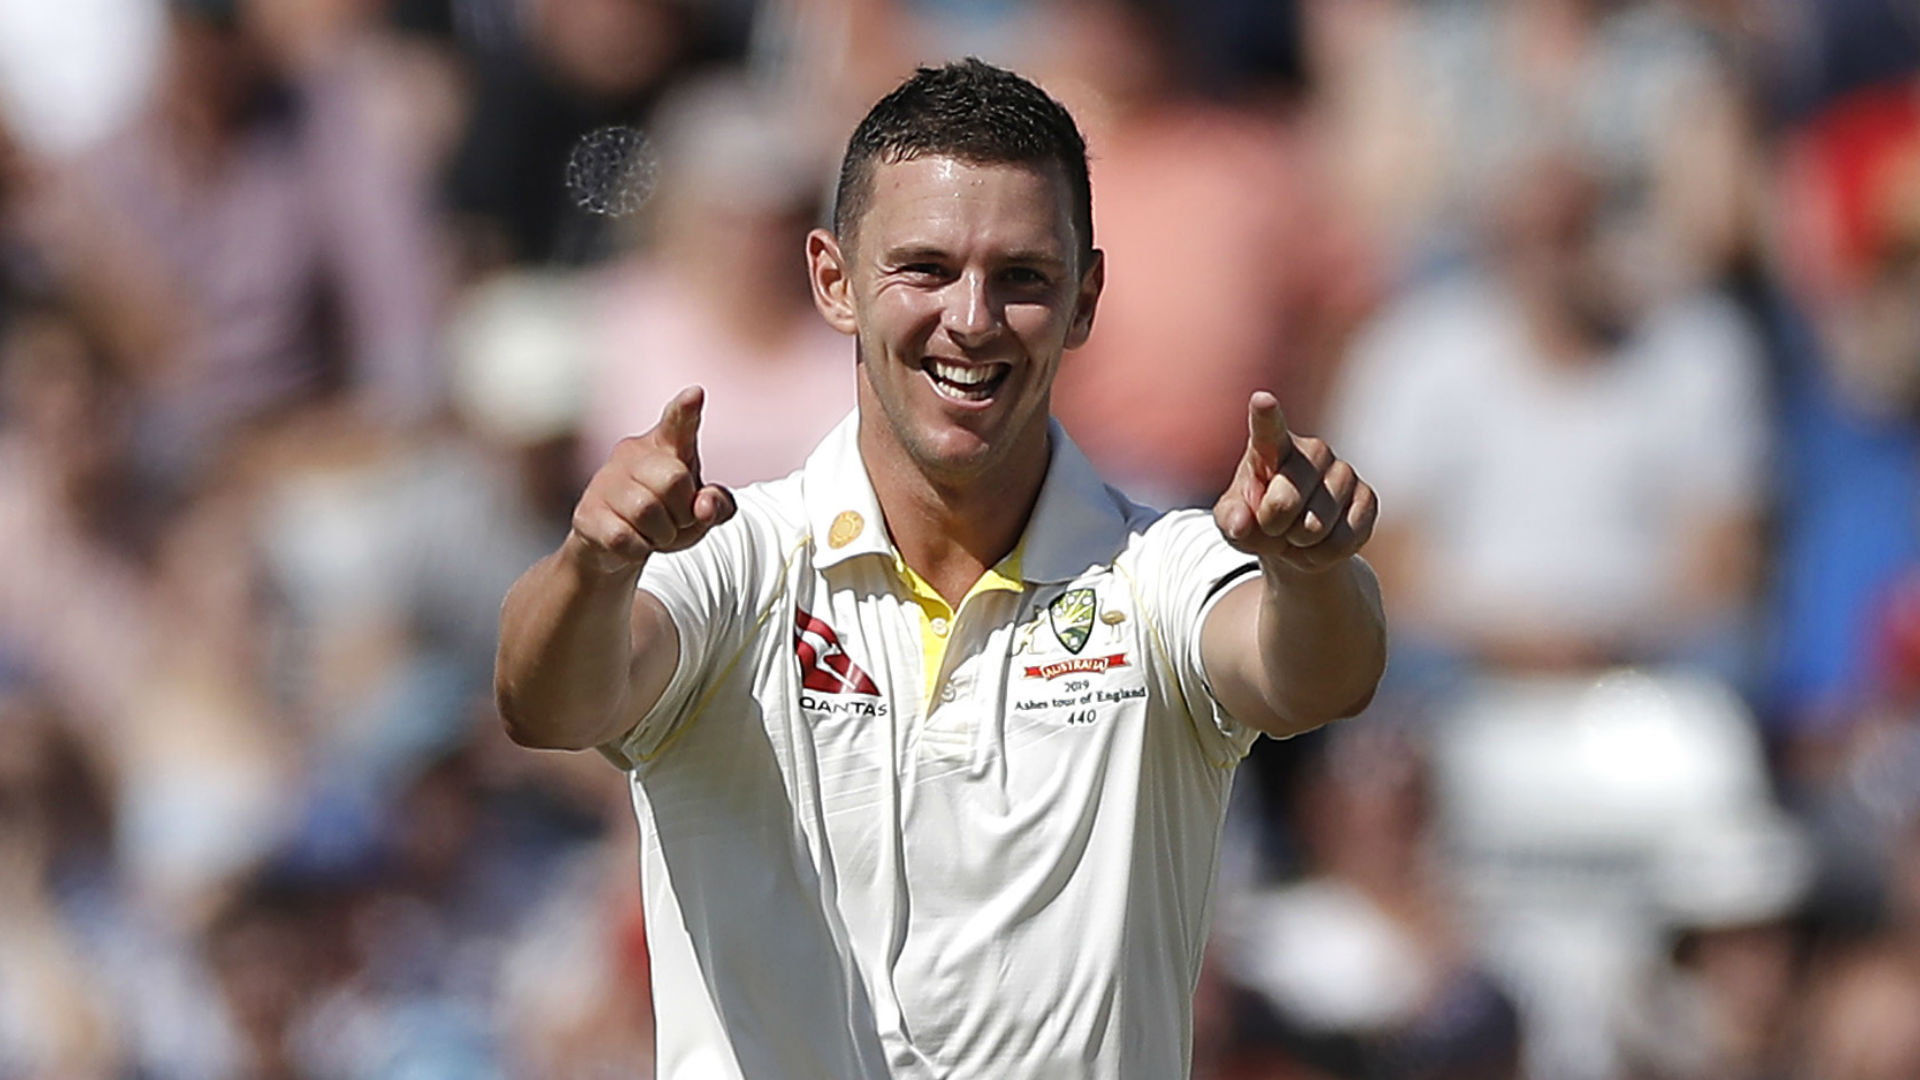 Joe Root's second successive duck gave Josh Hazlewood encouragement and Australia ripped through England to take charge of the third Test.